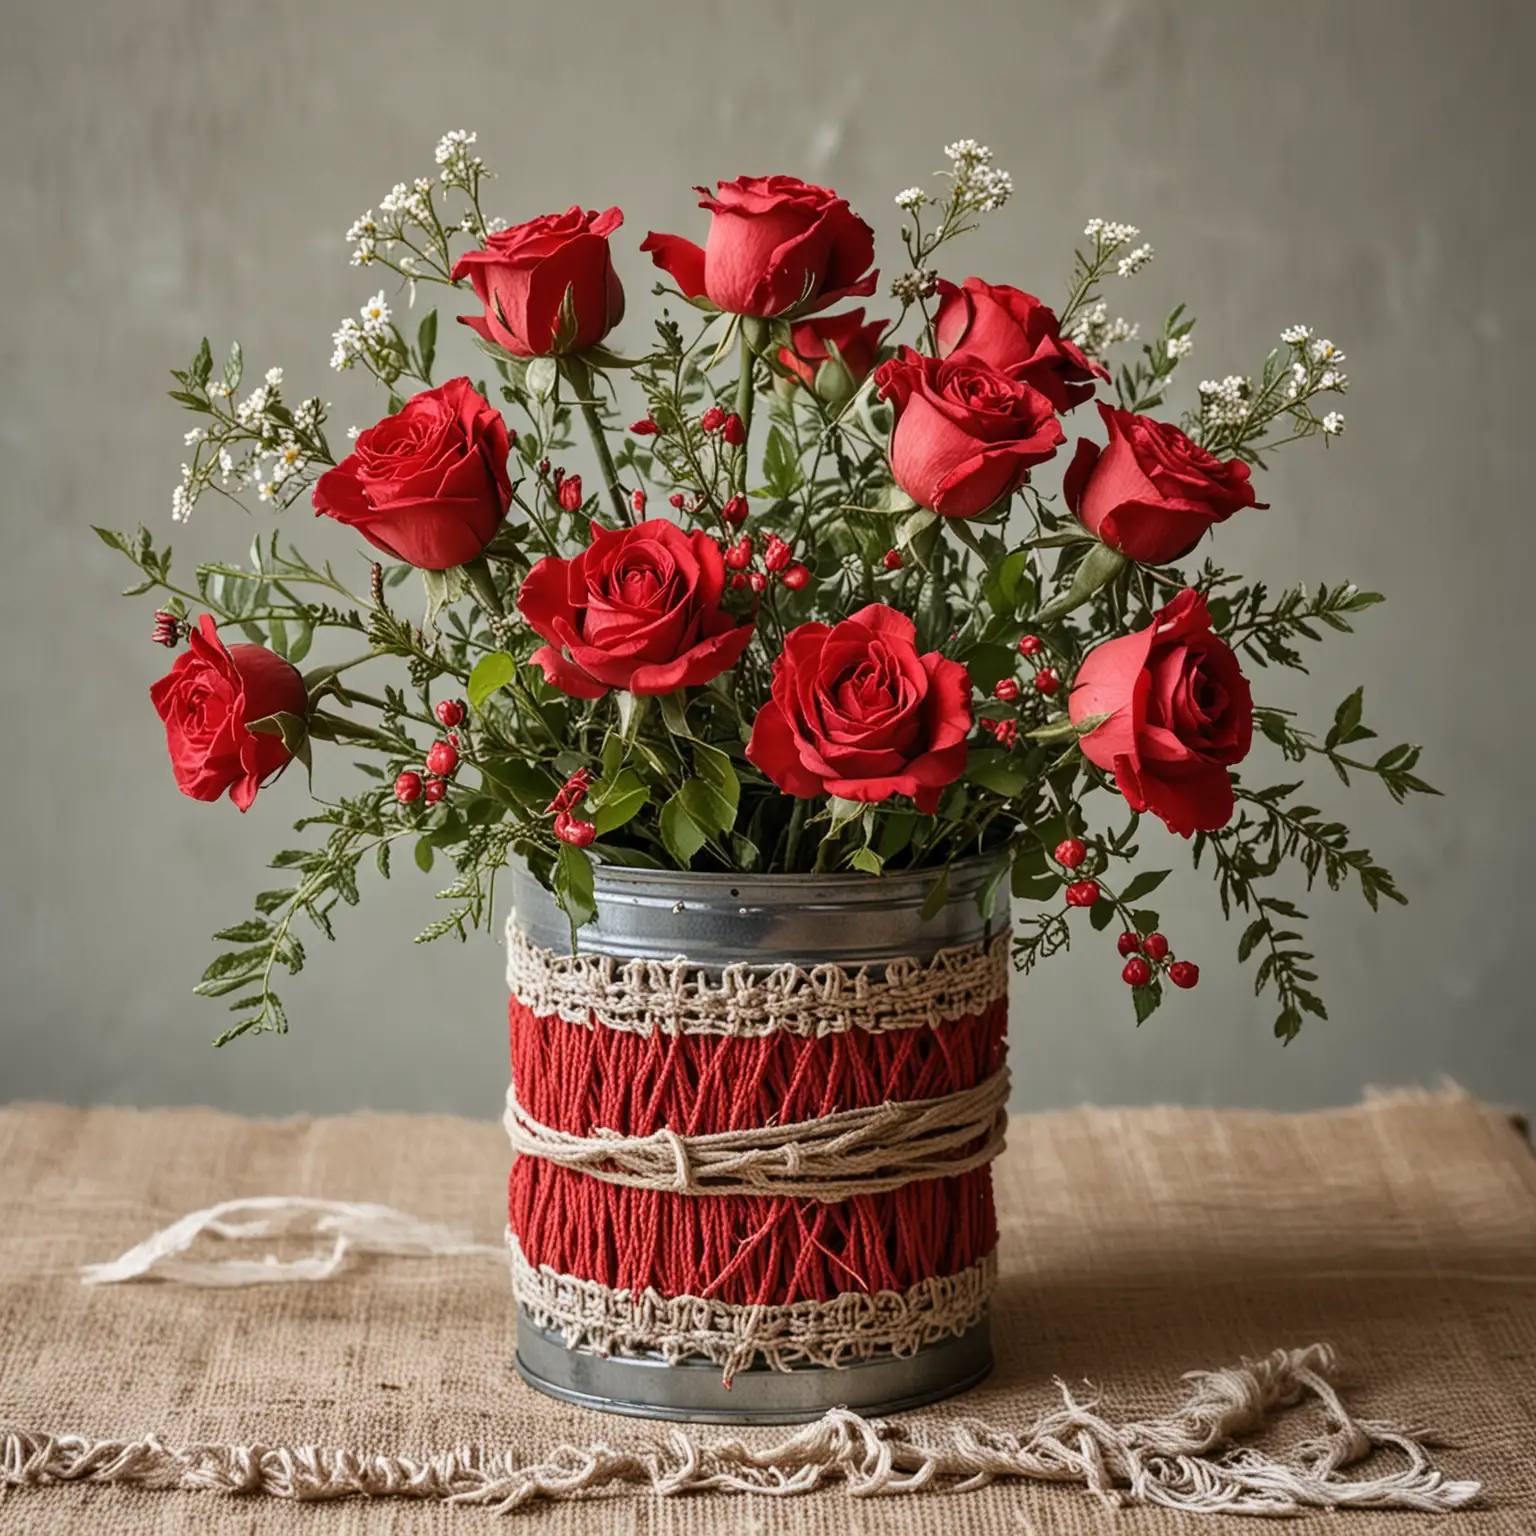 boho red rose centerpiece ideas using a distressed hand painted tin can vase covered with macrame and filled with small and simple bouquet of wild looking red roses and wild flowers